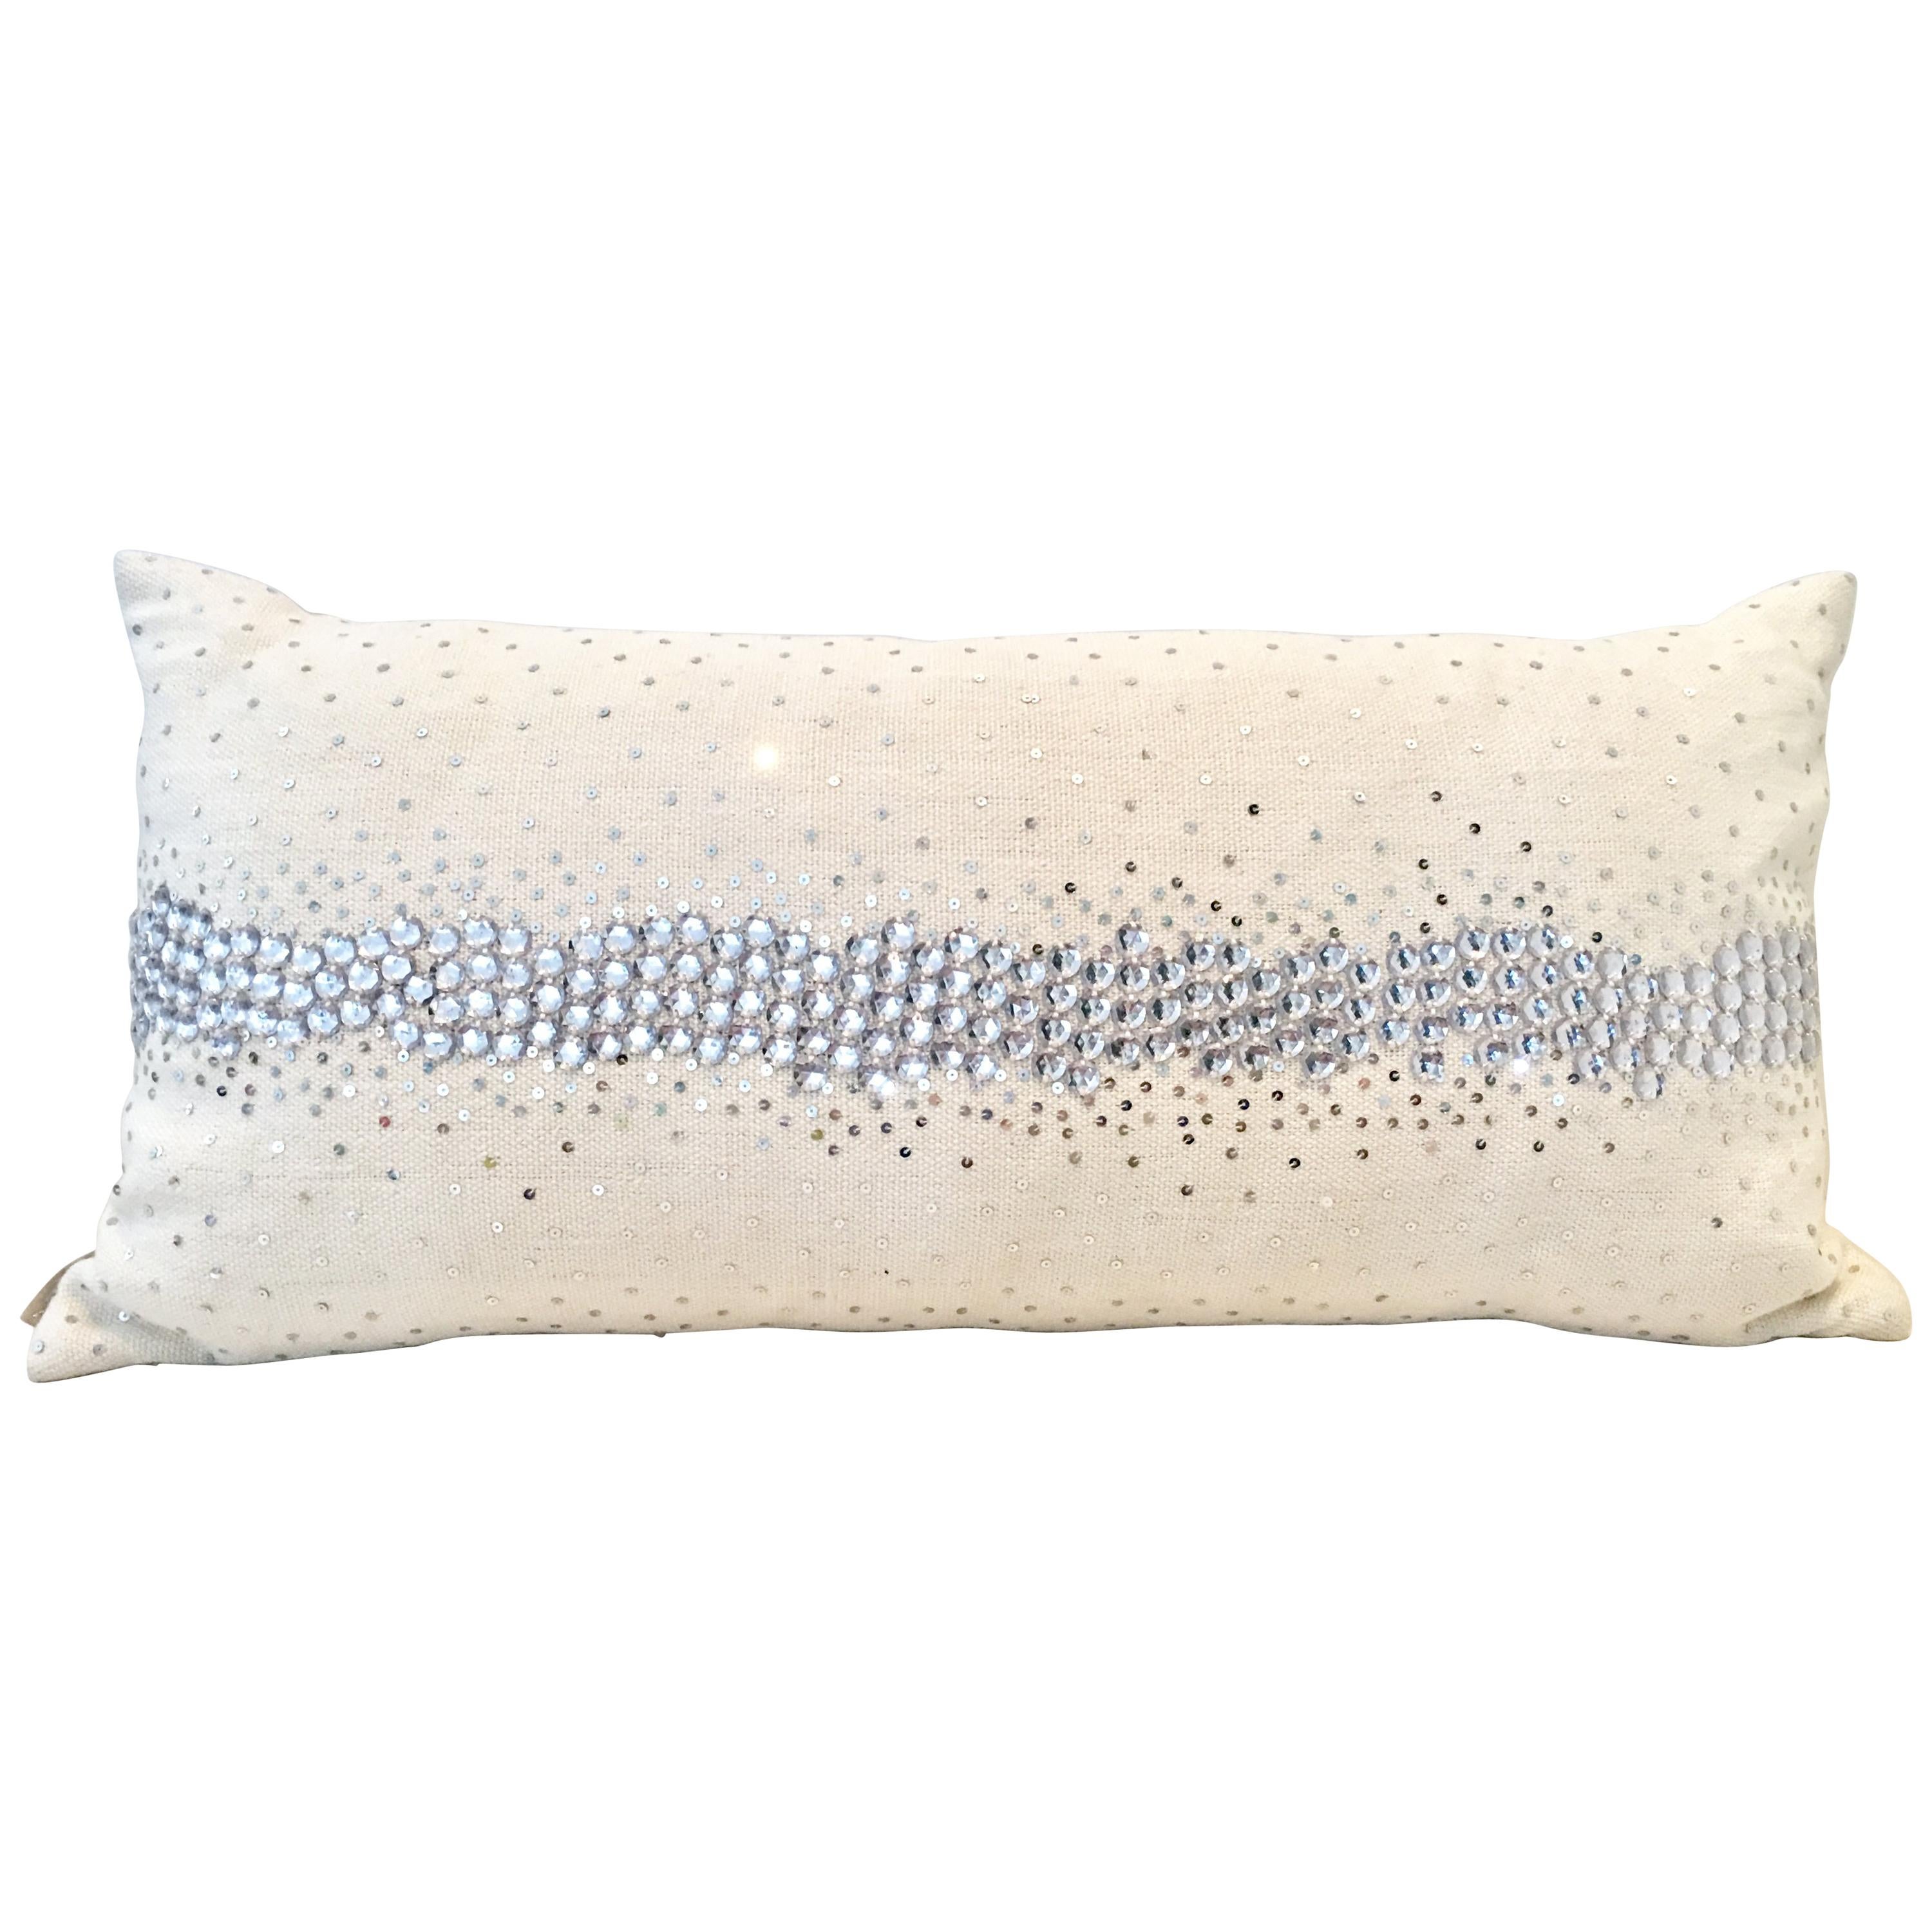 21st Century Linen & Crystal Down Bolster Pillow by, Sivaana For Sale